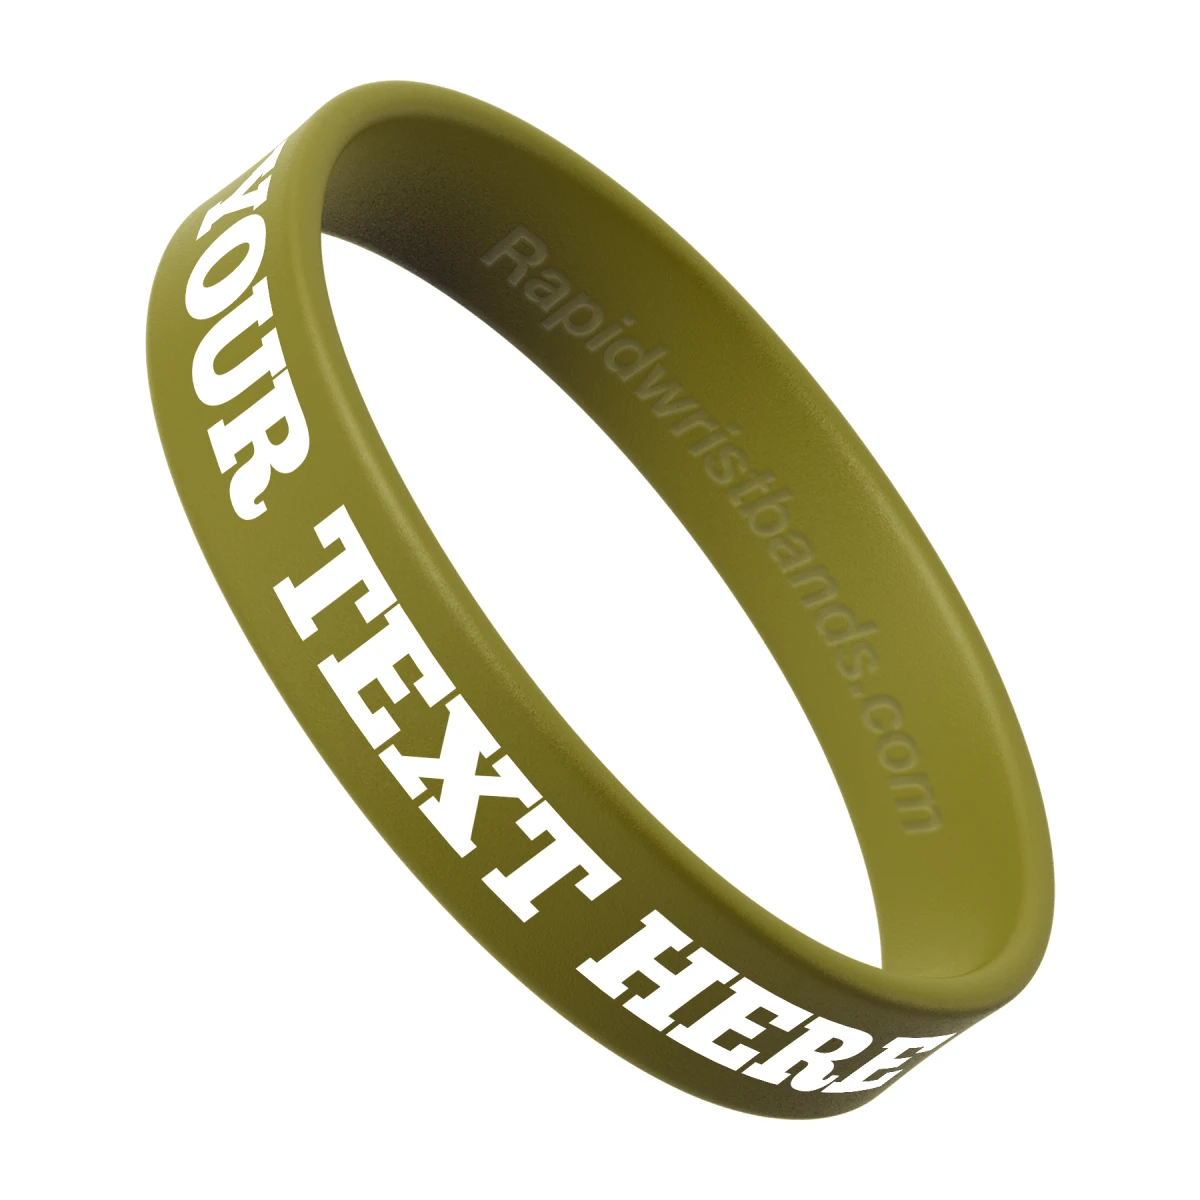 Olive Green Wristband With Your Text Here Printed In White